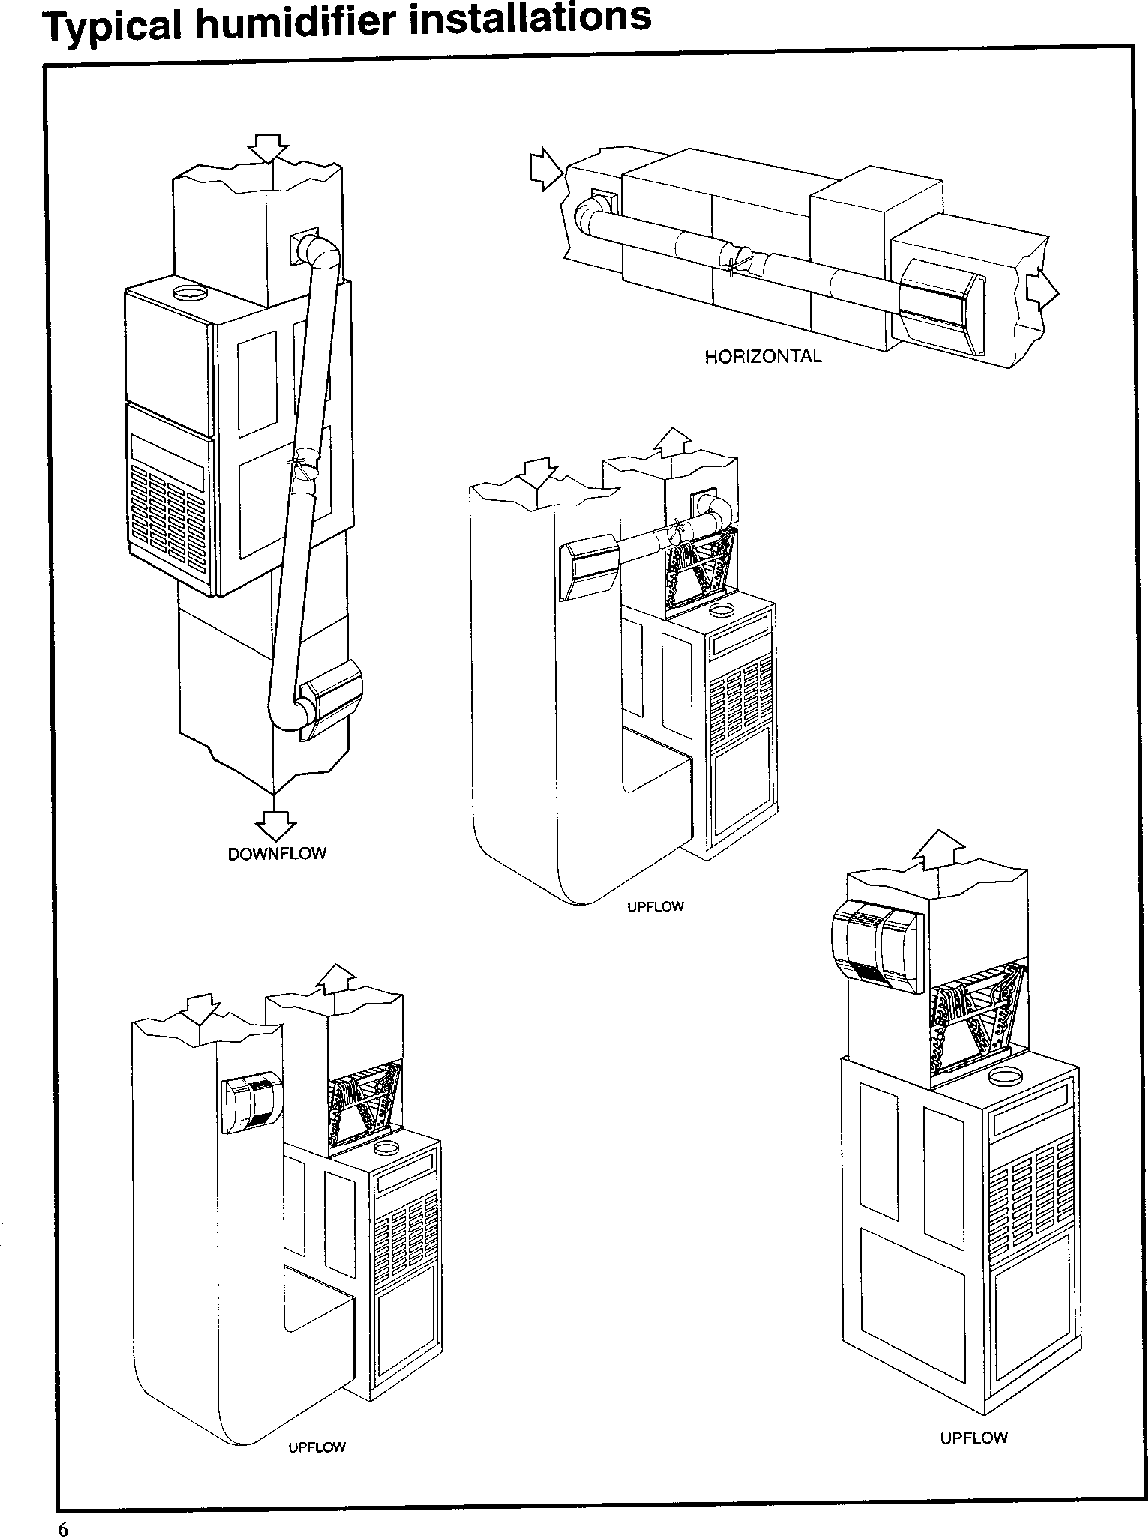 Page 7 of 8 - CARRIER  Humidifier Manual L0211036